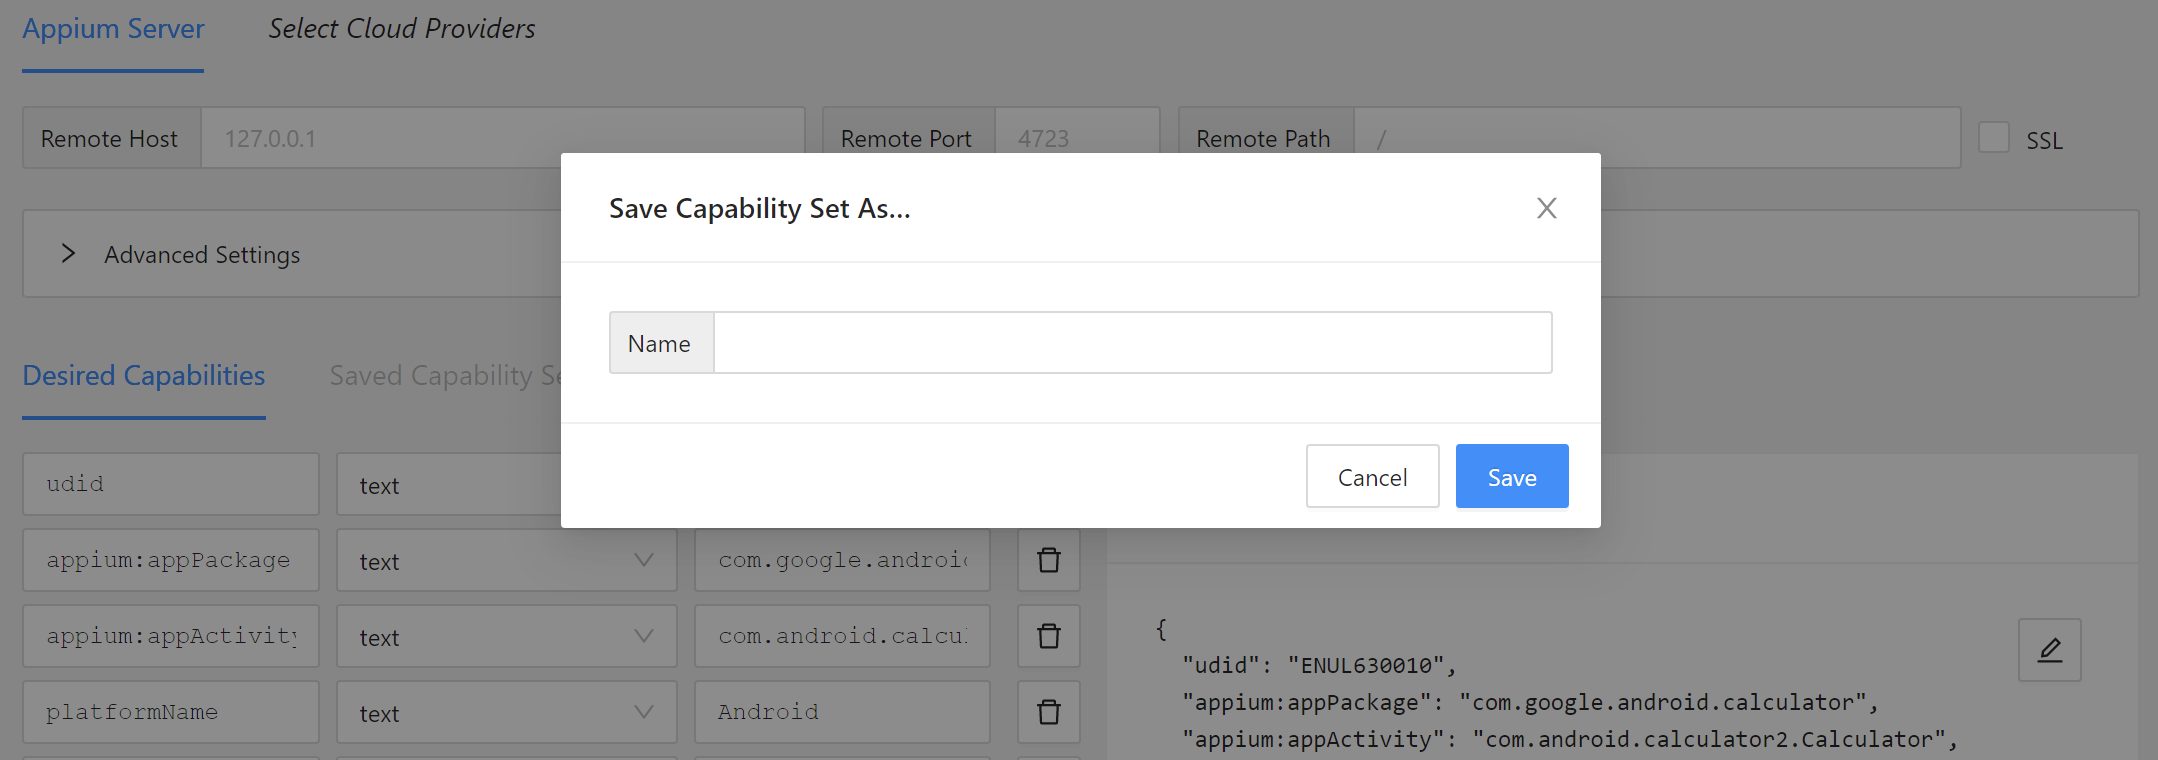 Appium Inspector Tutorial - Save Capability Set As... popup